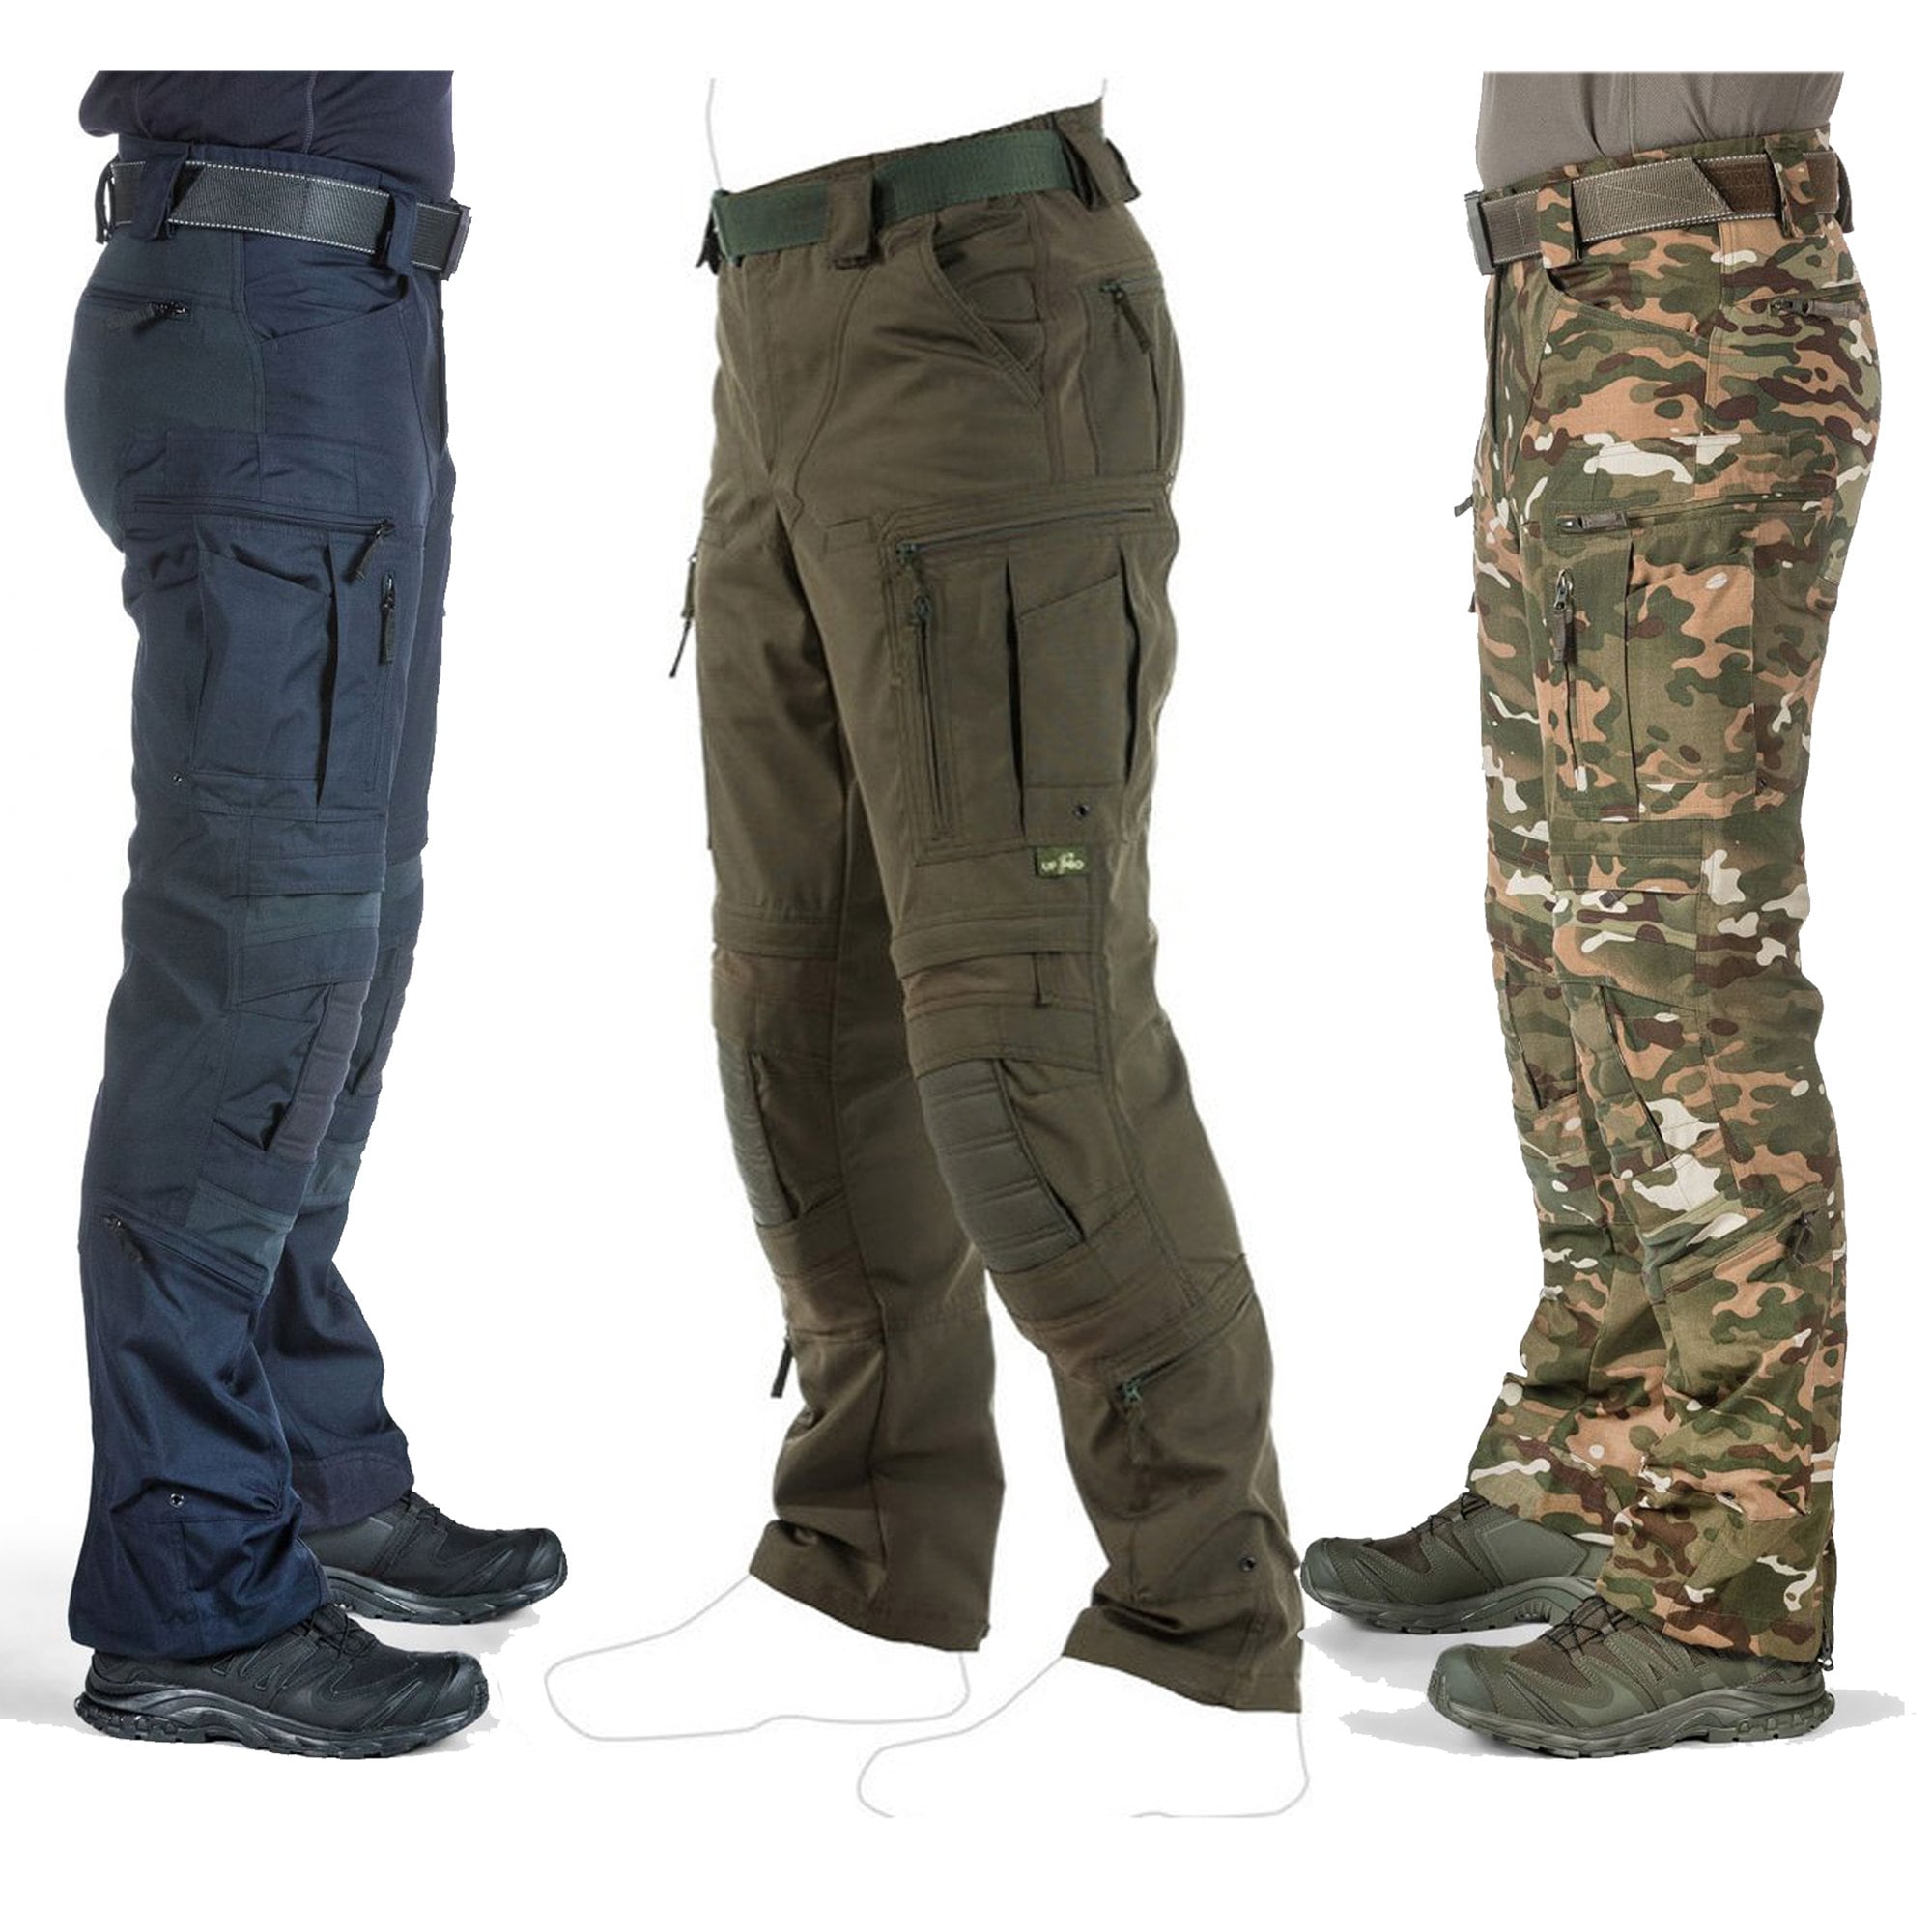 Spire Panama Triple Stitched Work Trousers with Knee Pad Pockets 